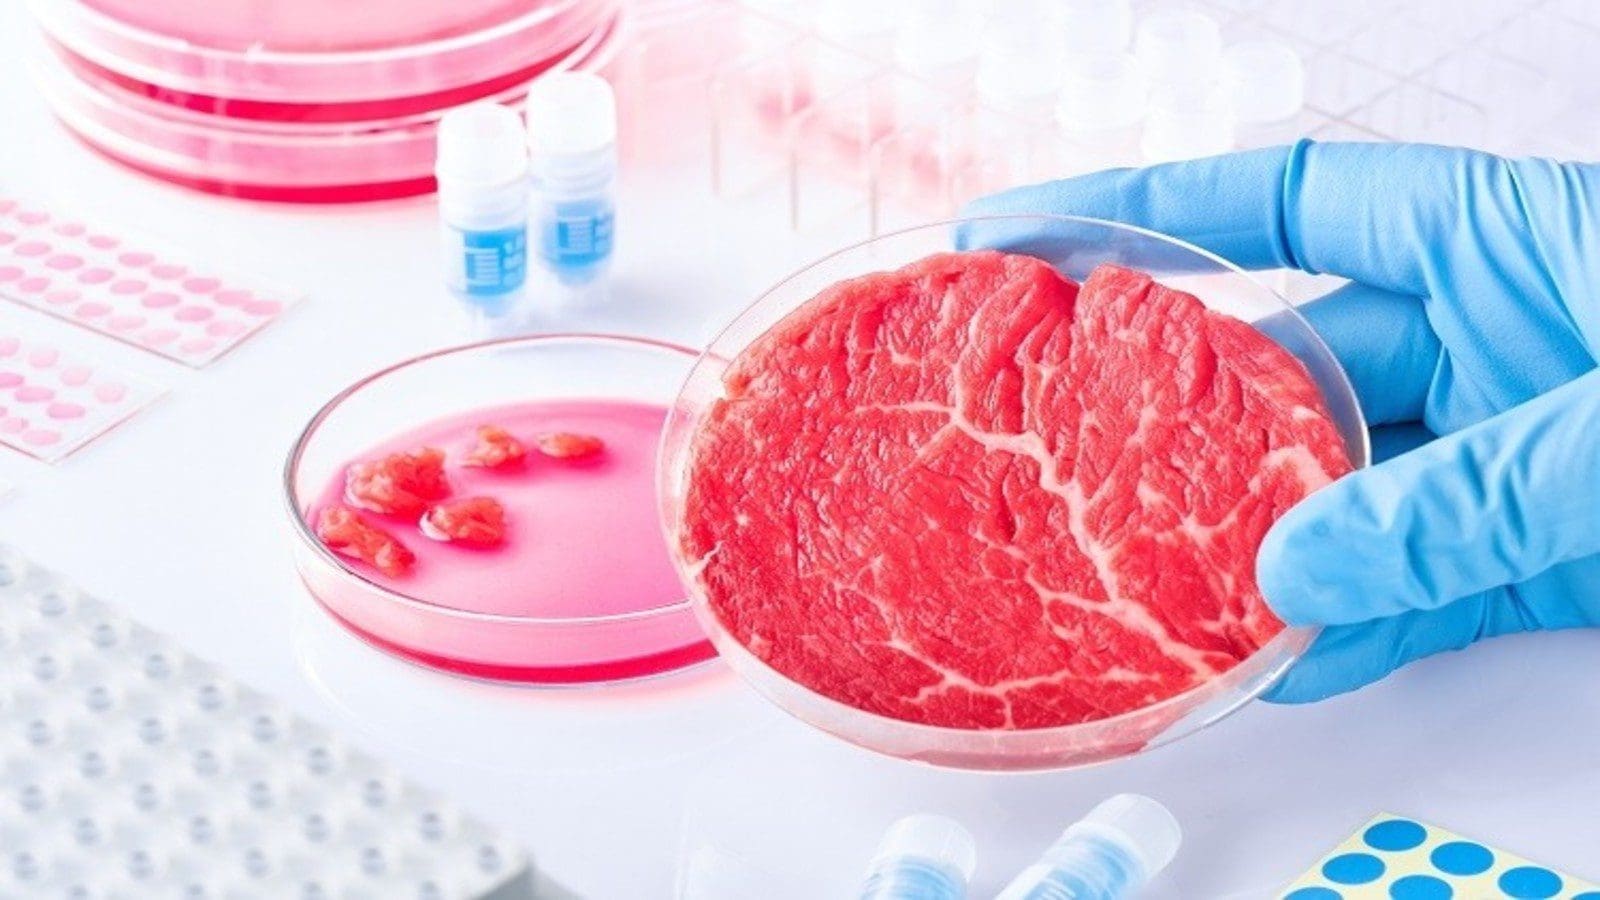 FSIS seeks public opinion on labeling of cell cultured meat, poultry